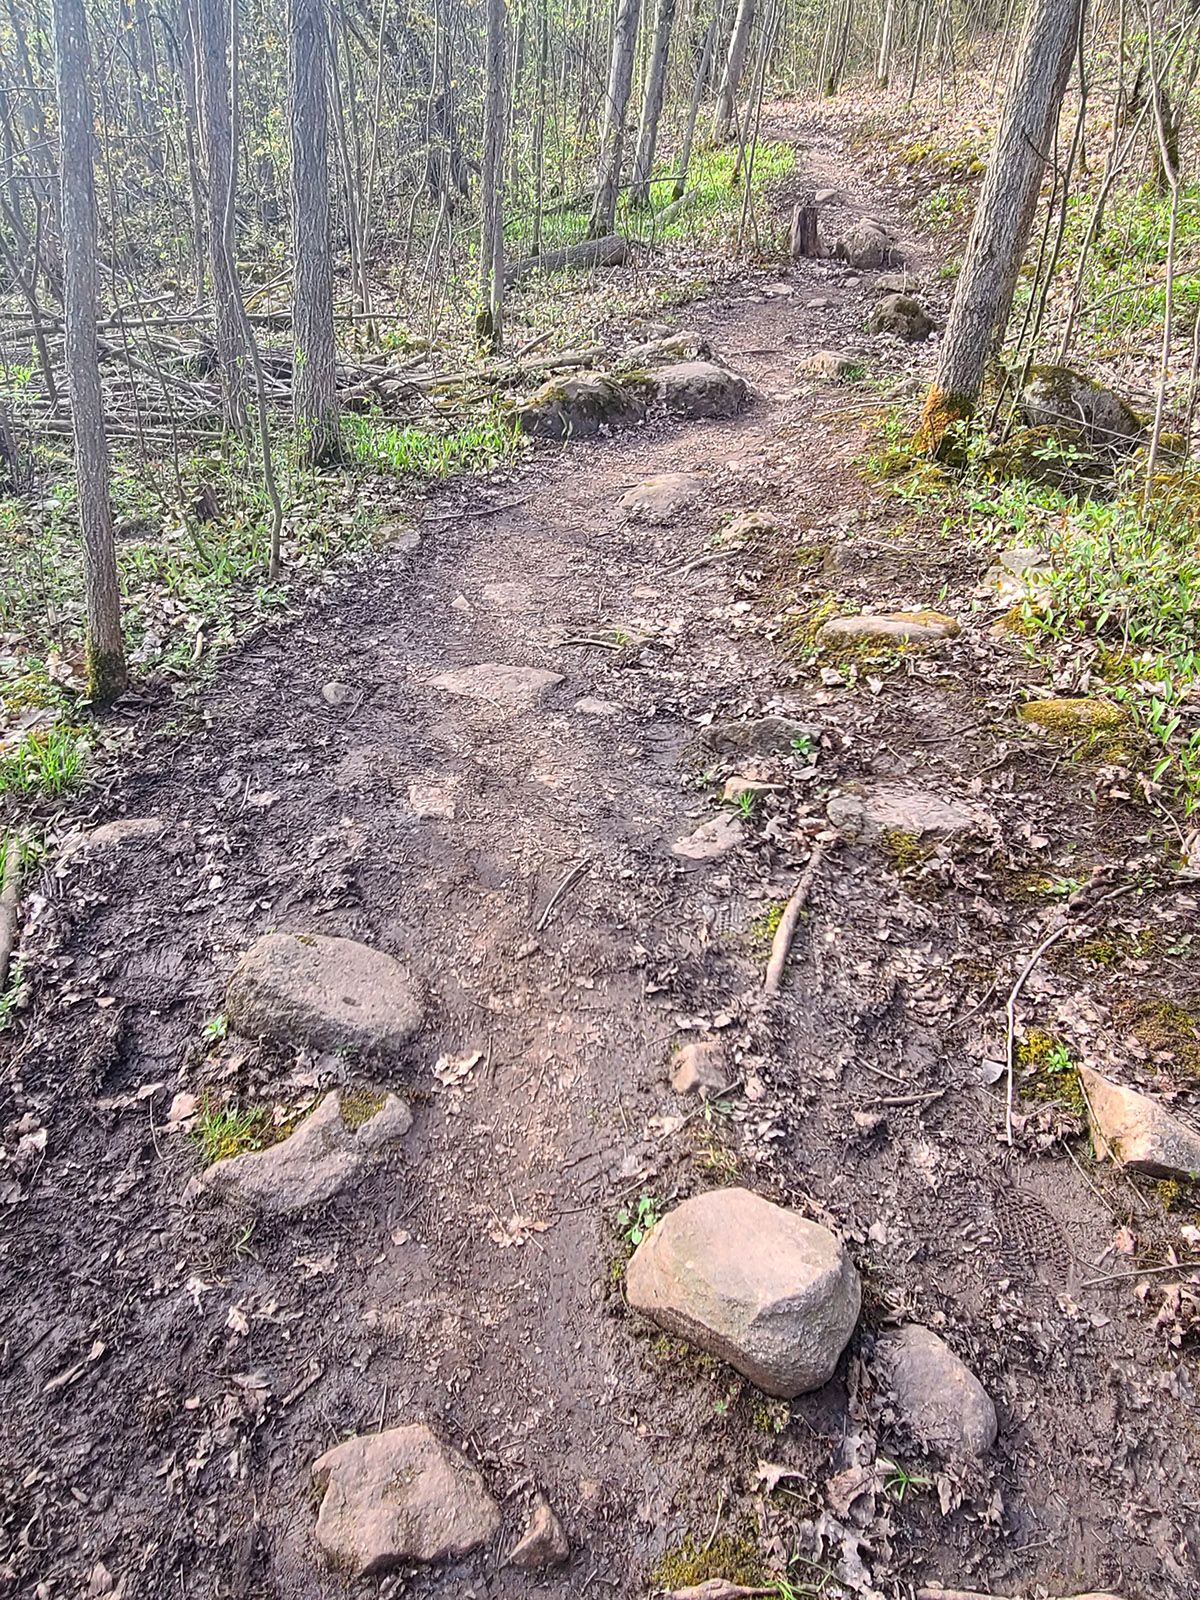 A rocky trail through the woods, on the Cheltenham Badlands trail.